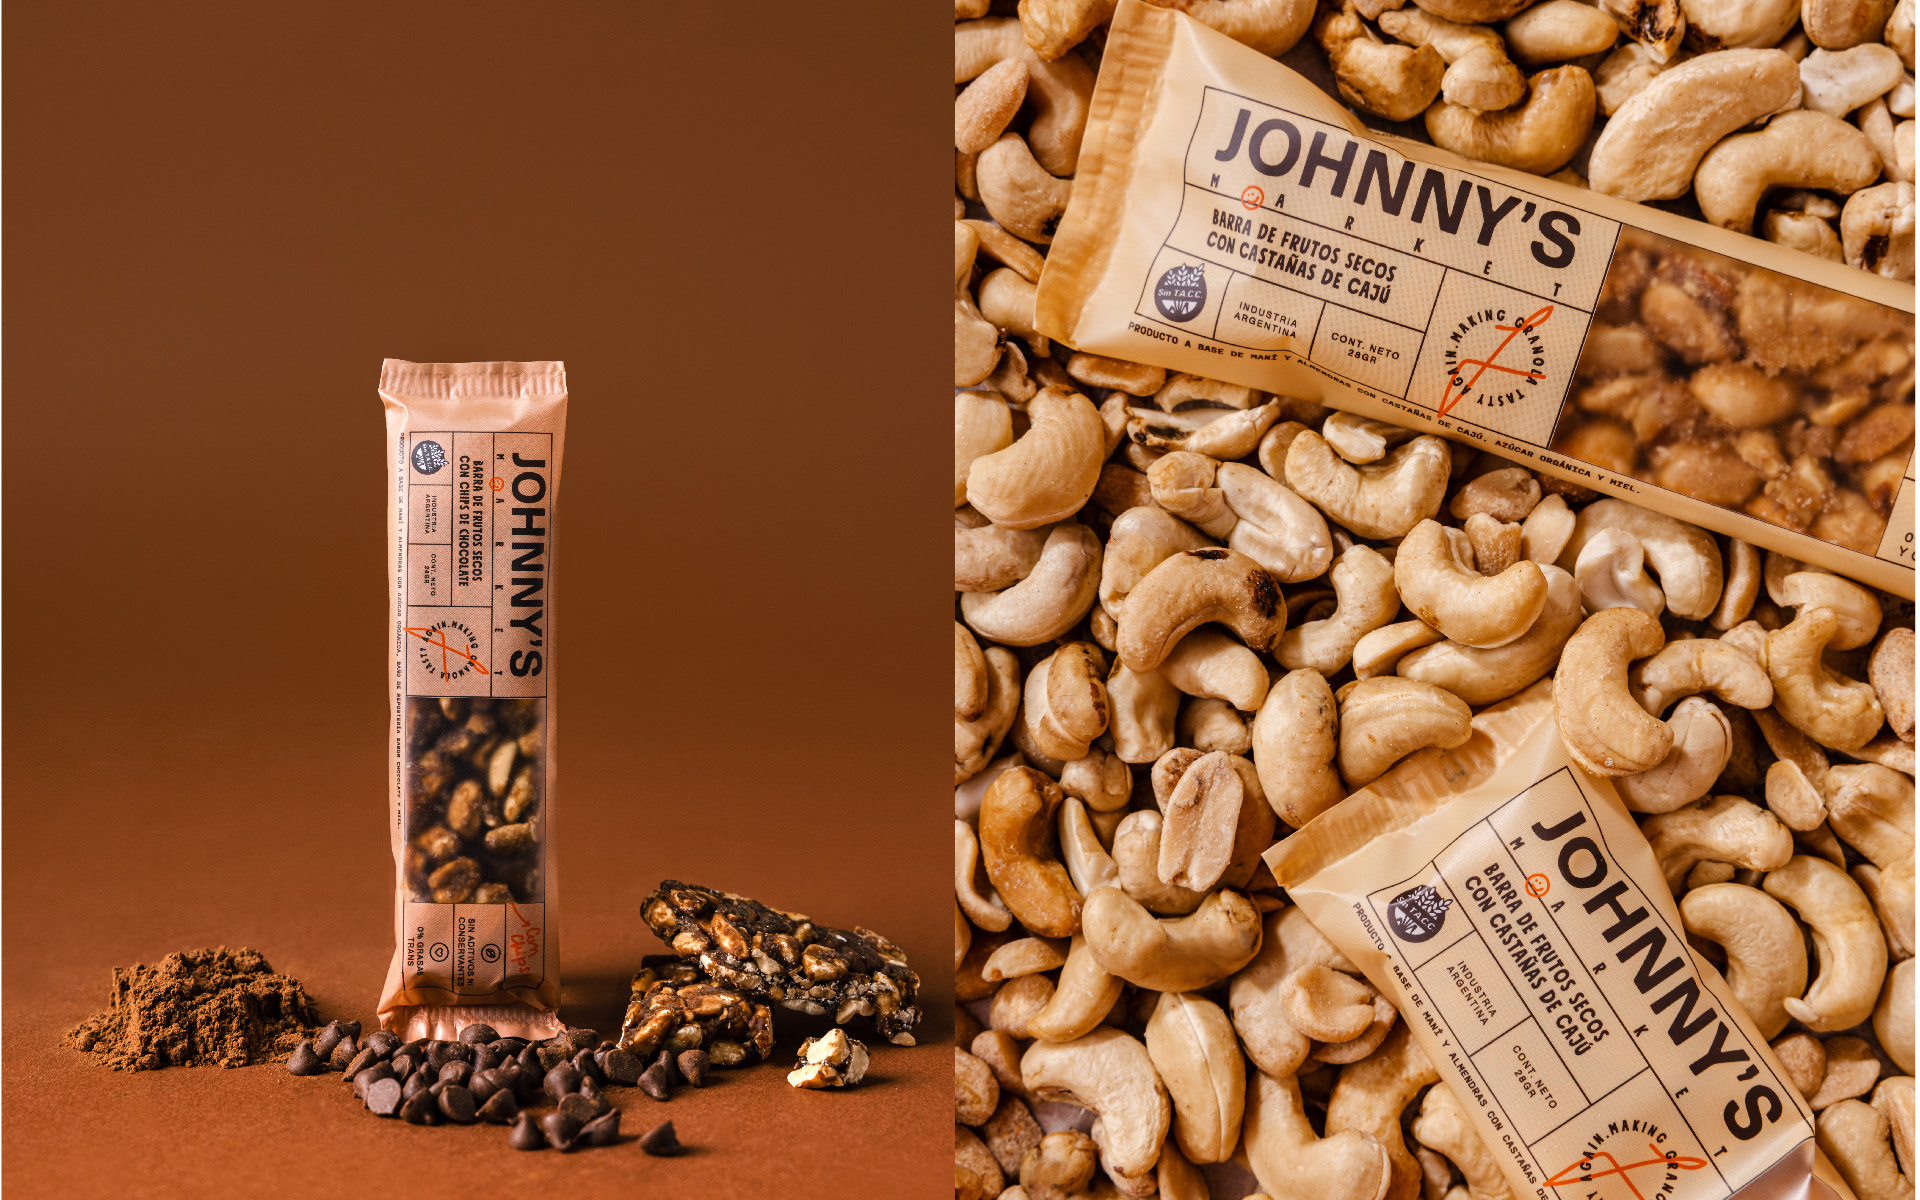 Creating A Unique Brand Identity for Johnny’s Organic Food Market